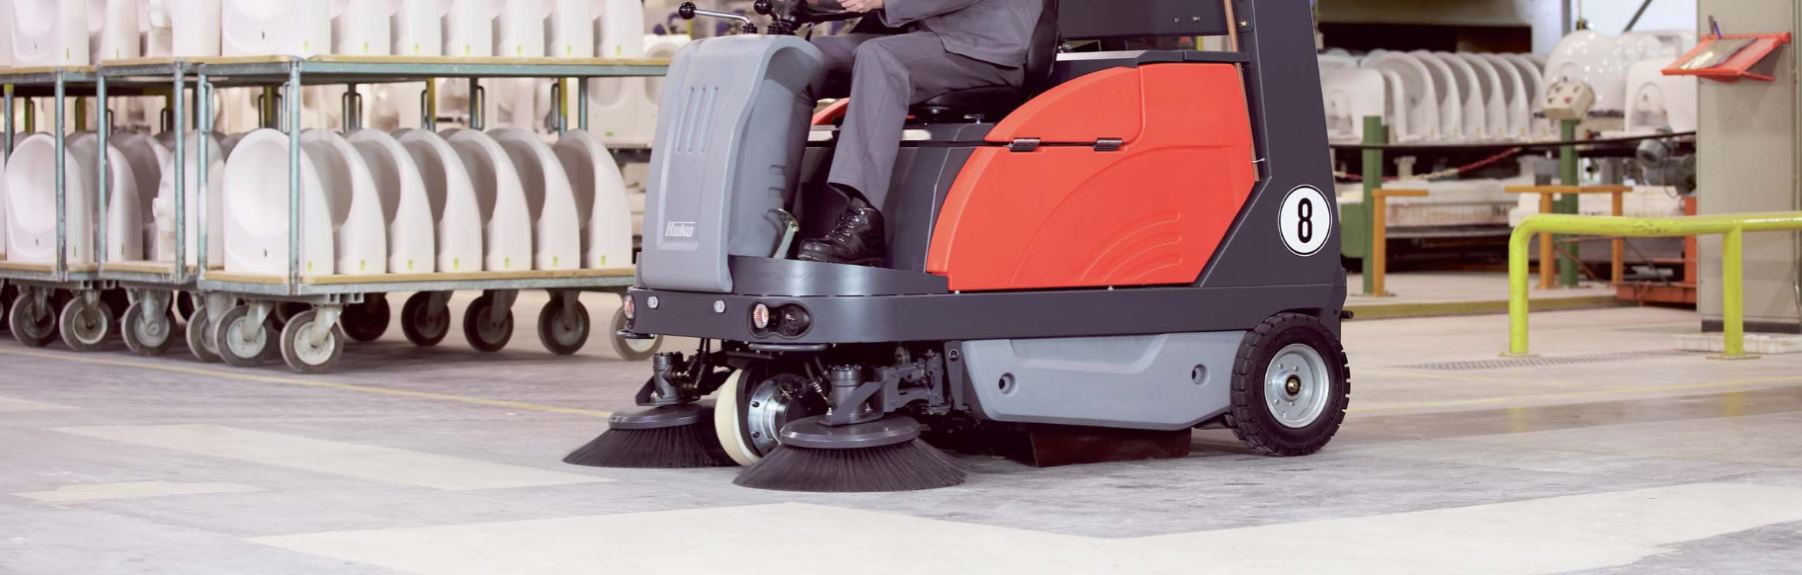 Tips to choose the perfect floor sweeper